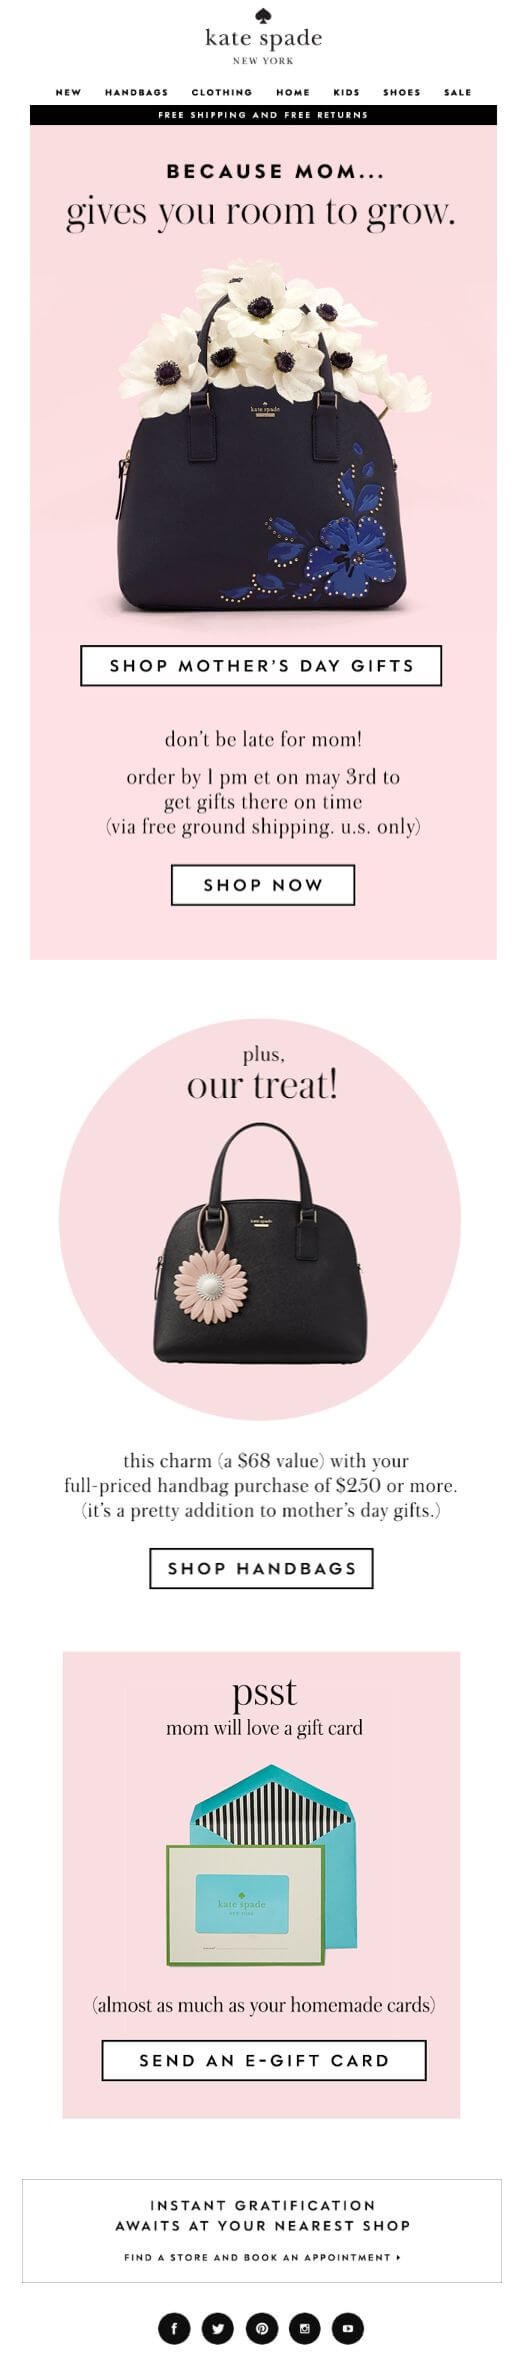 kate-spade-mothers-day-email-example